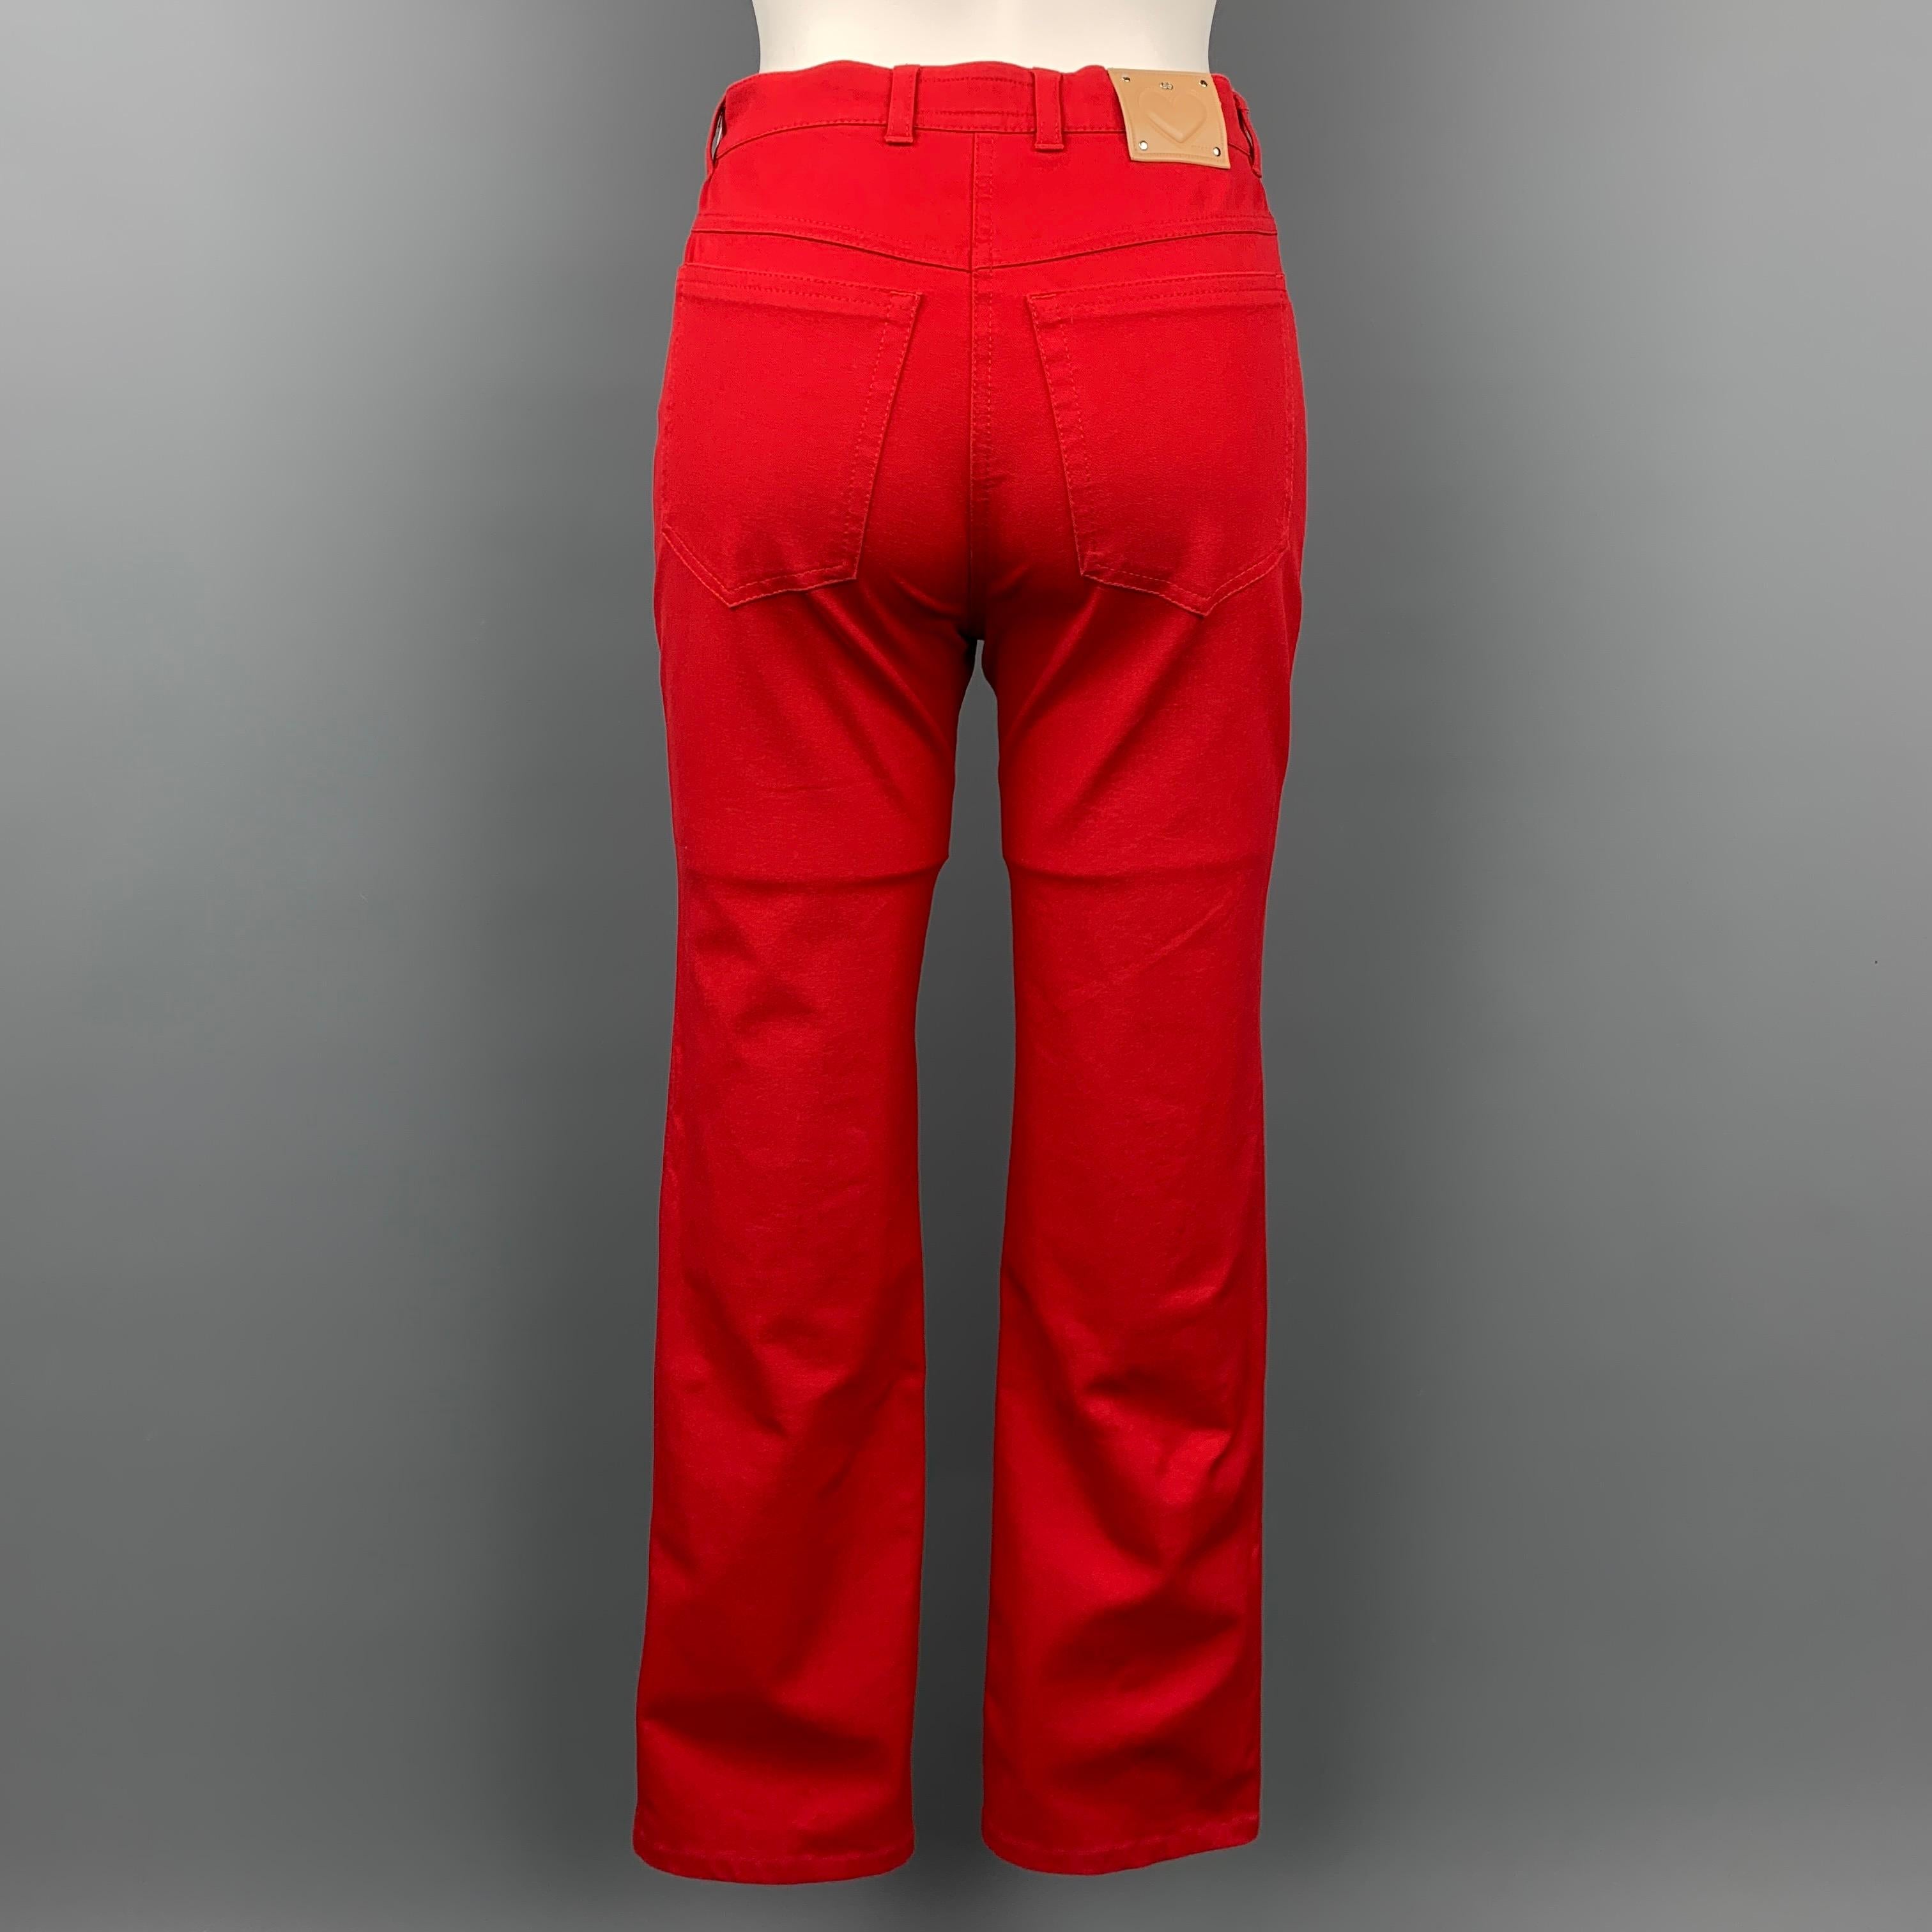 ESCADA dress pants comes in a red stretch cotton featuring a straight leg, silver tone hardware, and a zip fly closure. 

Very Good Pre-Owned Condition.
Marked: 34

Measurements:

Waist: 26 in.
Rise: 10 in.
Inseam: 30 in. 